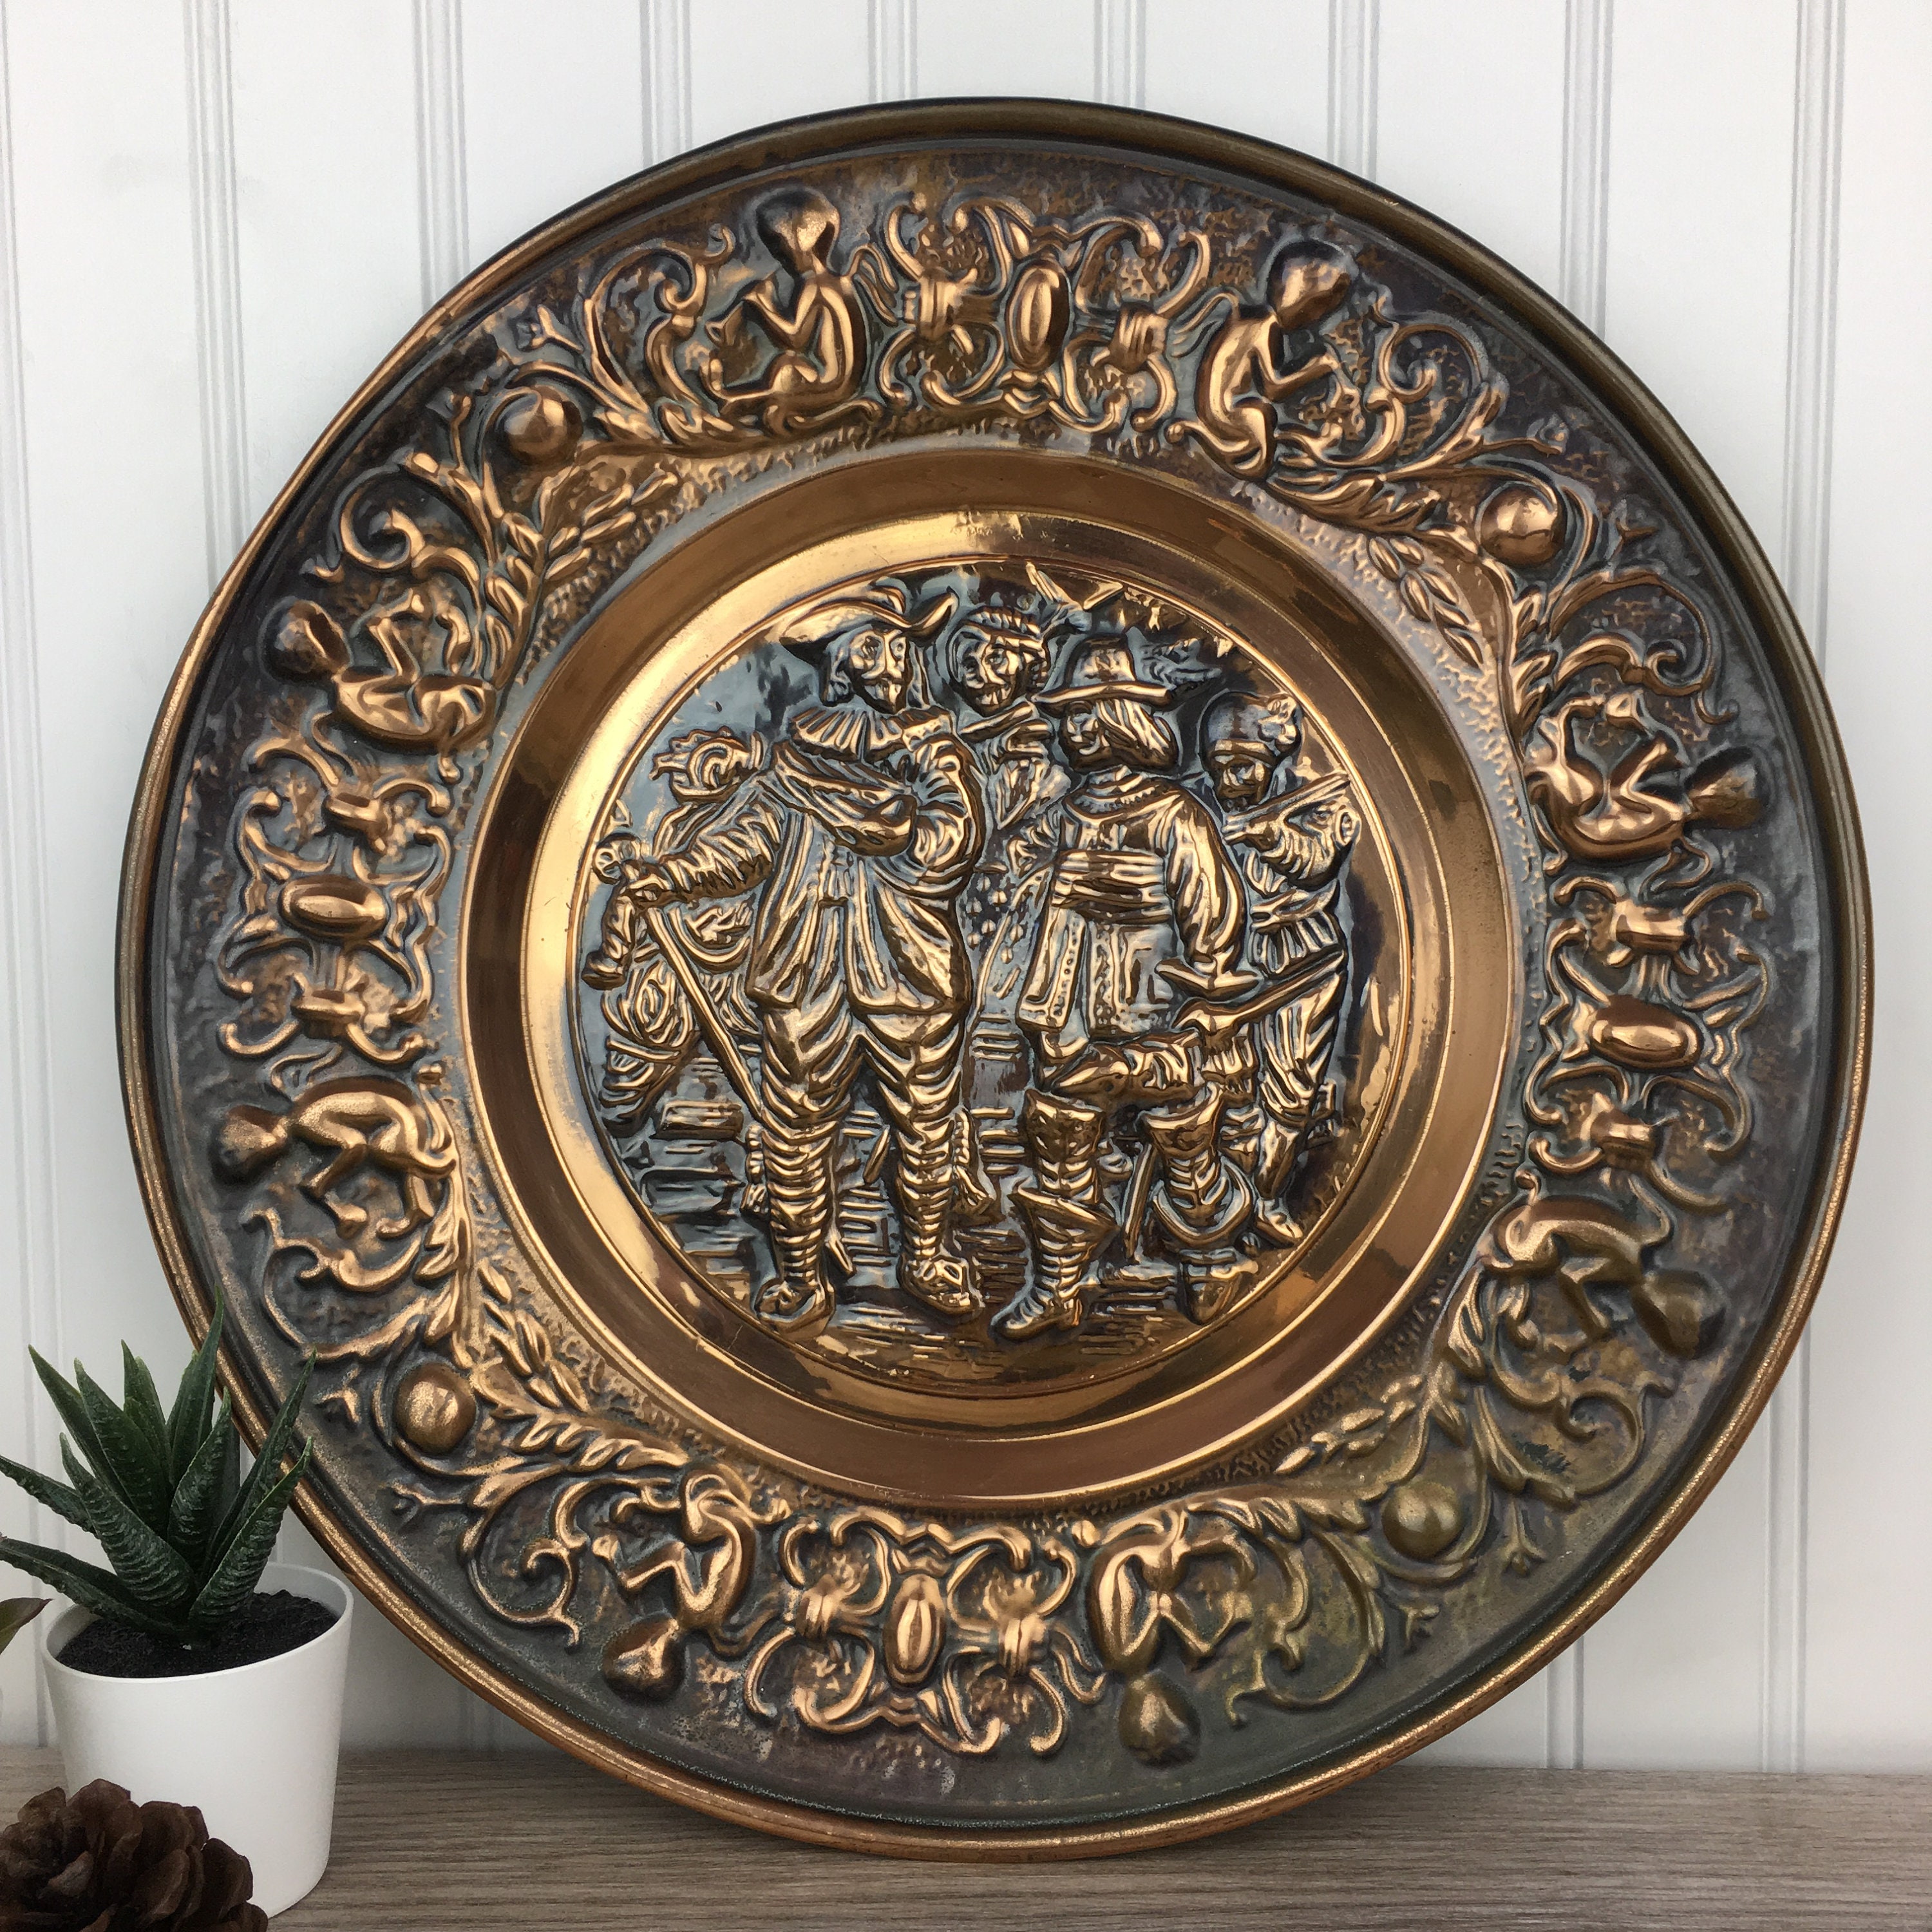 Hammered Copper Shrine Plate - 7 inch